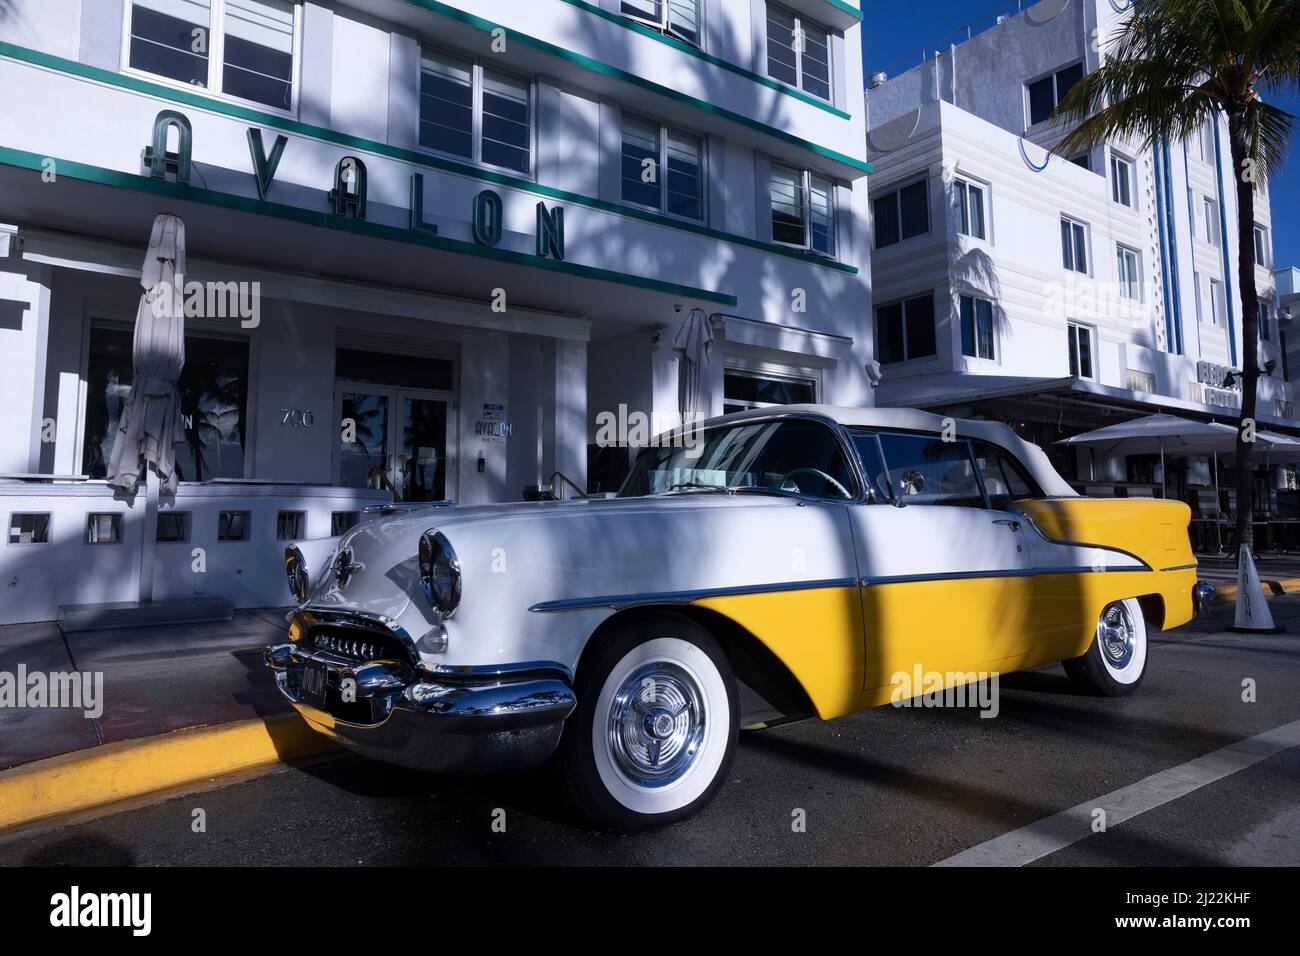 Avalon Hotel Miami on Ocean Dr, in Miami Beach, FL  with classic Oldsmobile car in front Stock Photo